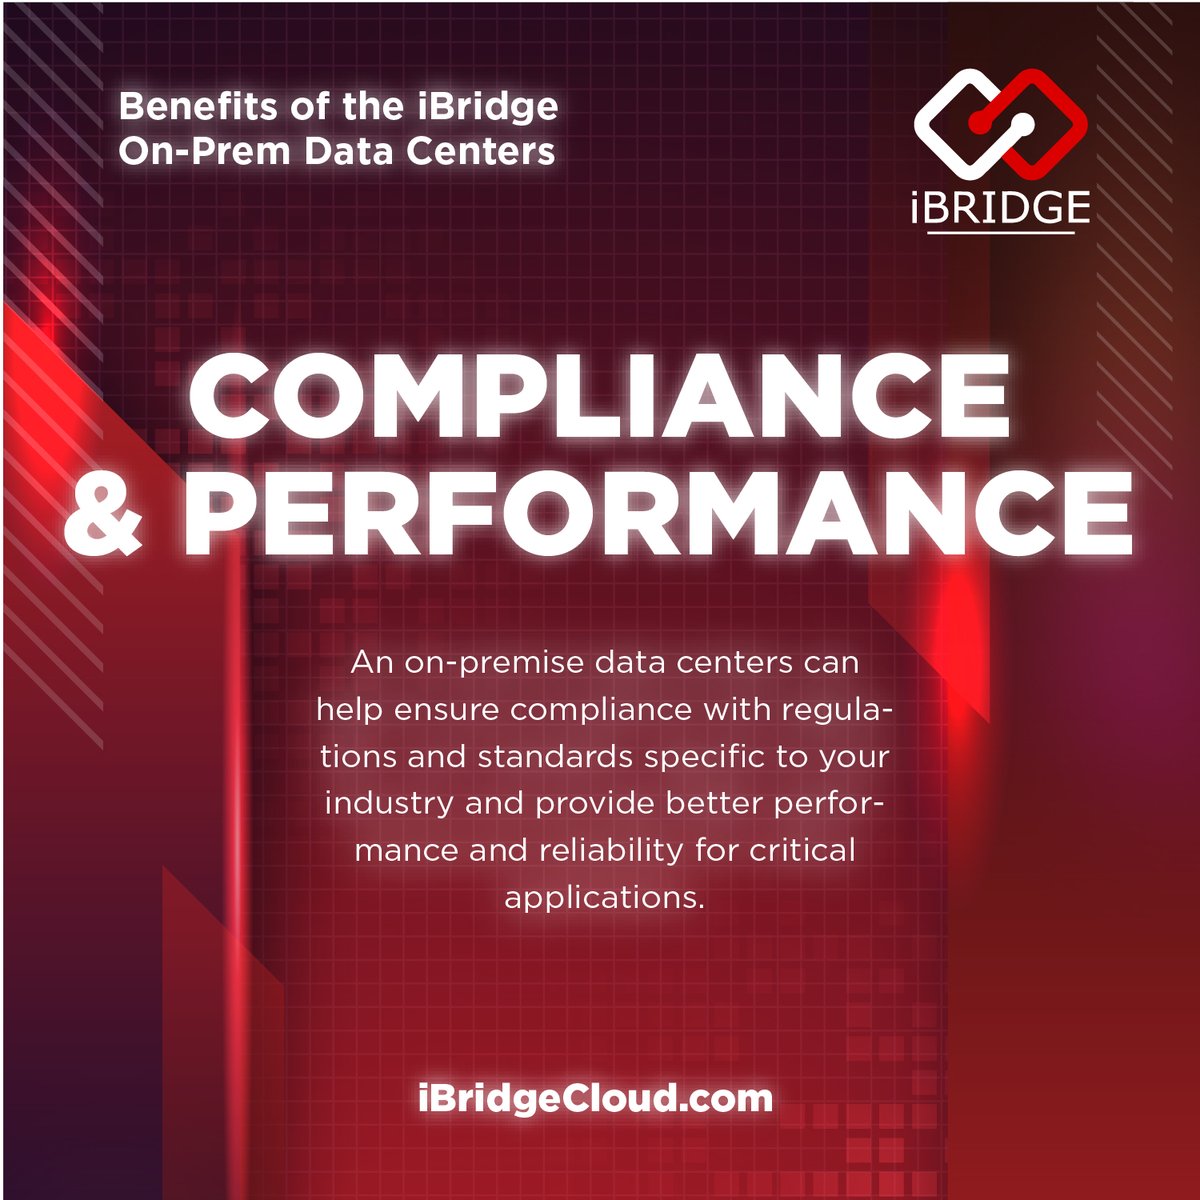 Ensure compliance and performance with our on-premises solutions! Stay ahead of regulatory requirements and optimize performance with our tailored setups. Trust us to keep your business running smoothly. Contact us today! iBridgeCloud.com